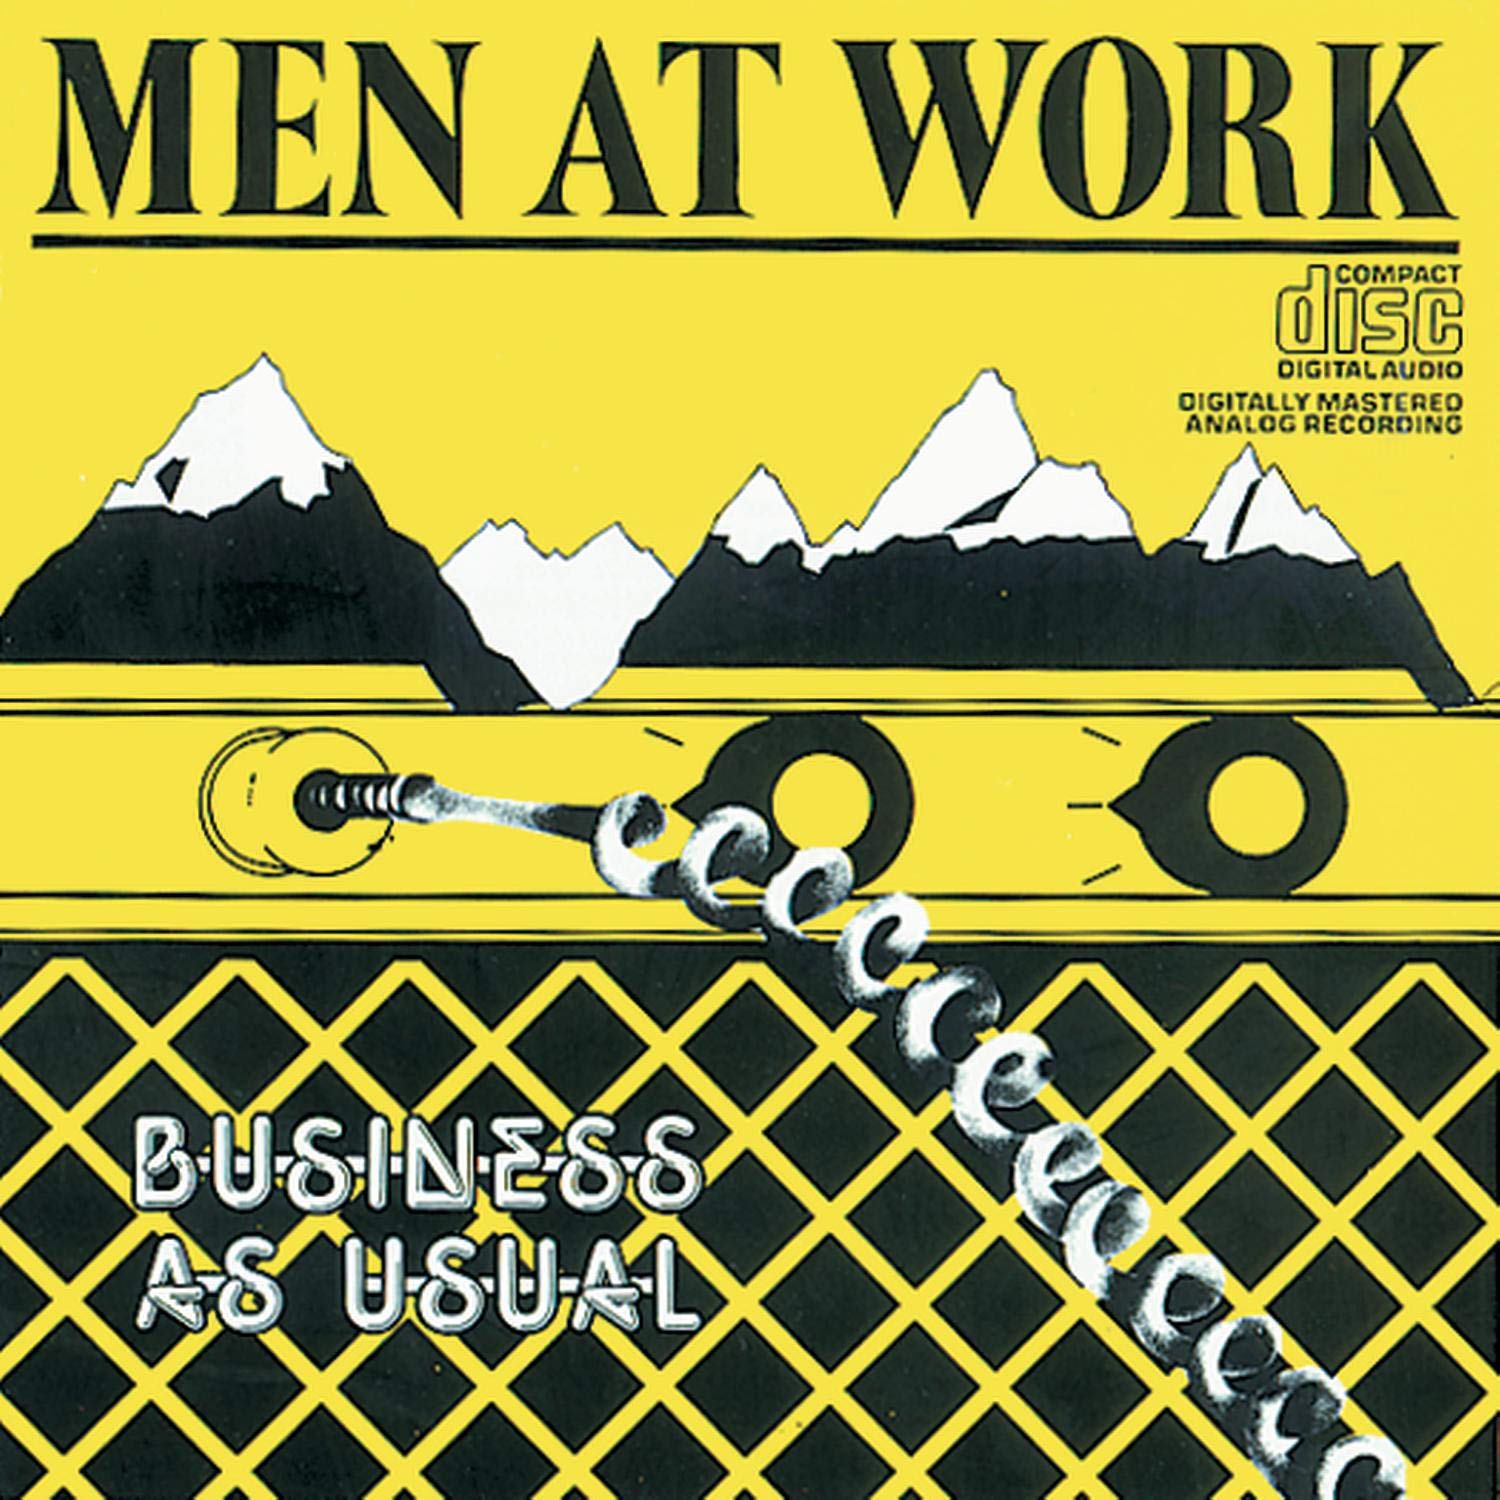 Art for Down Under by Men At Work